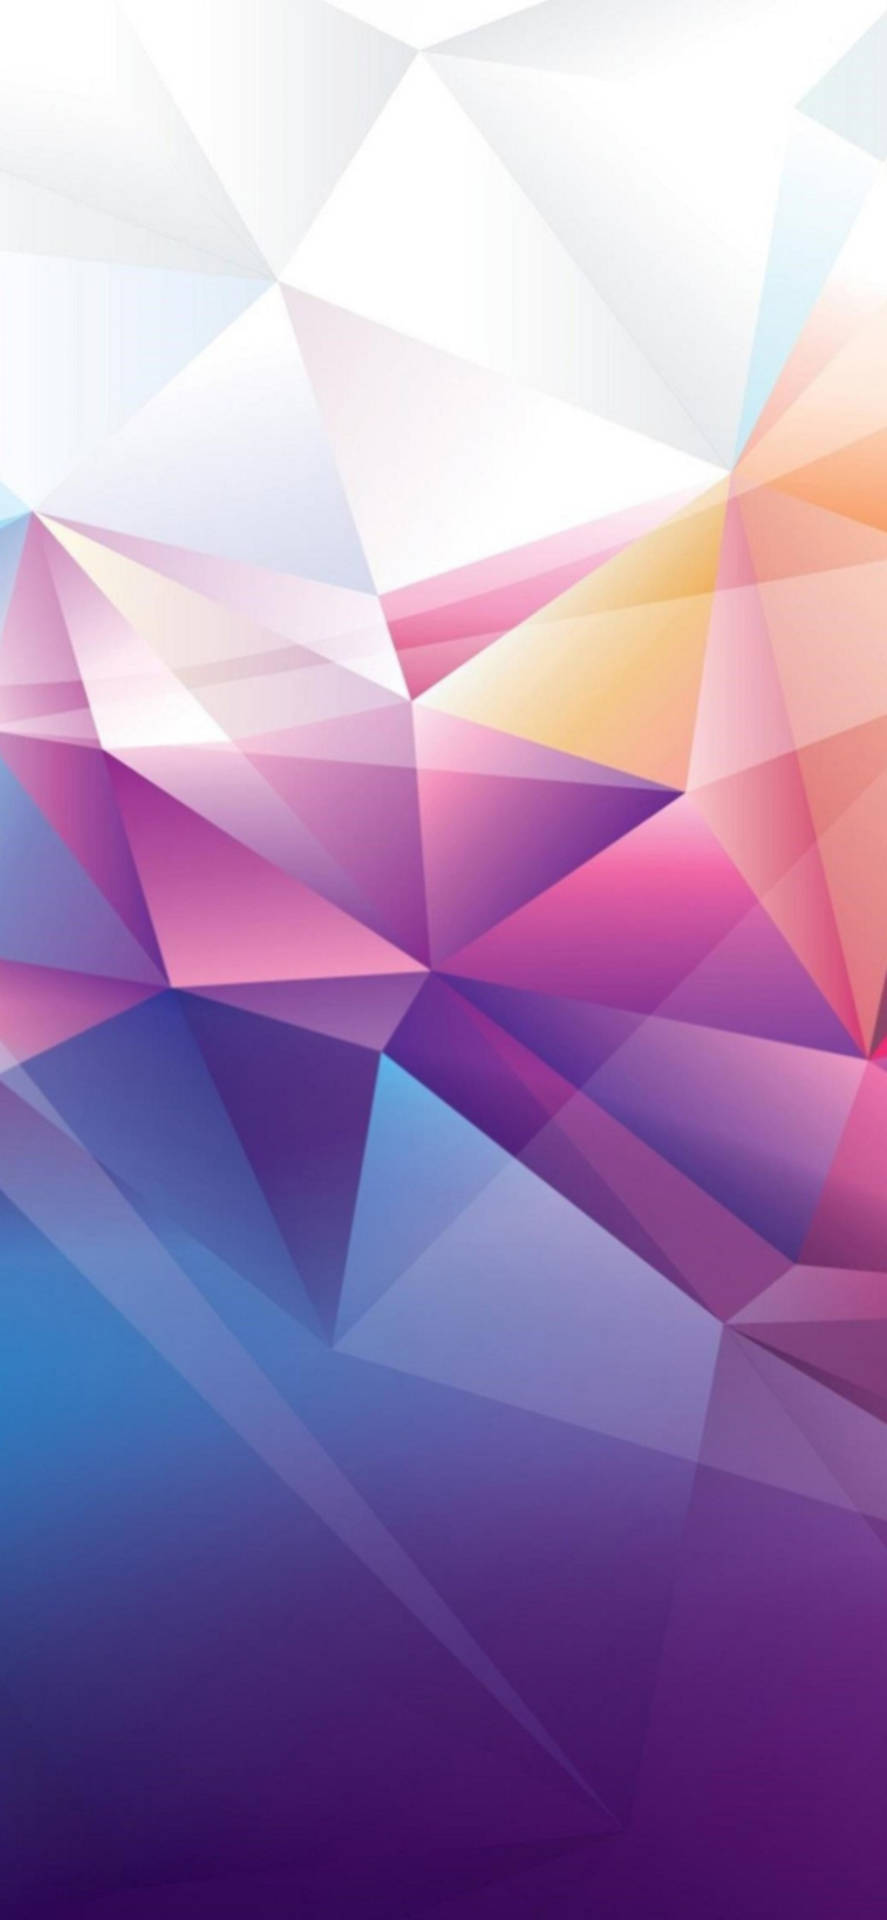 Iphone 13 Pro Max Polygon Shapes Background